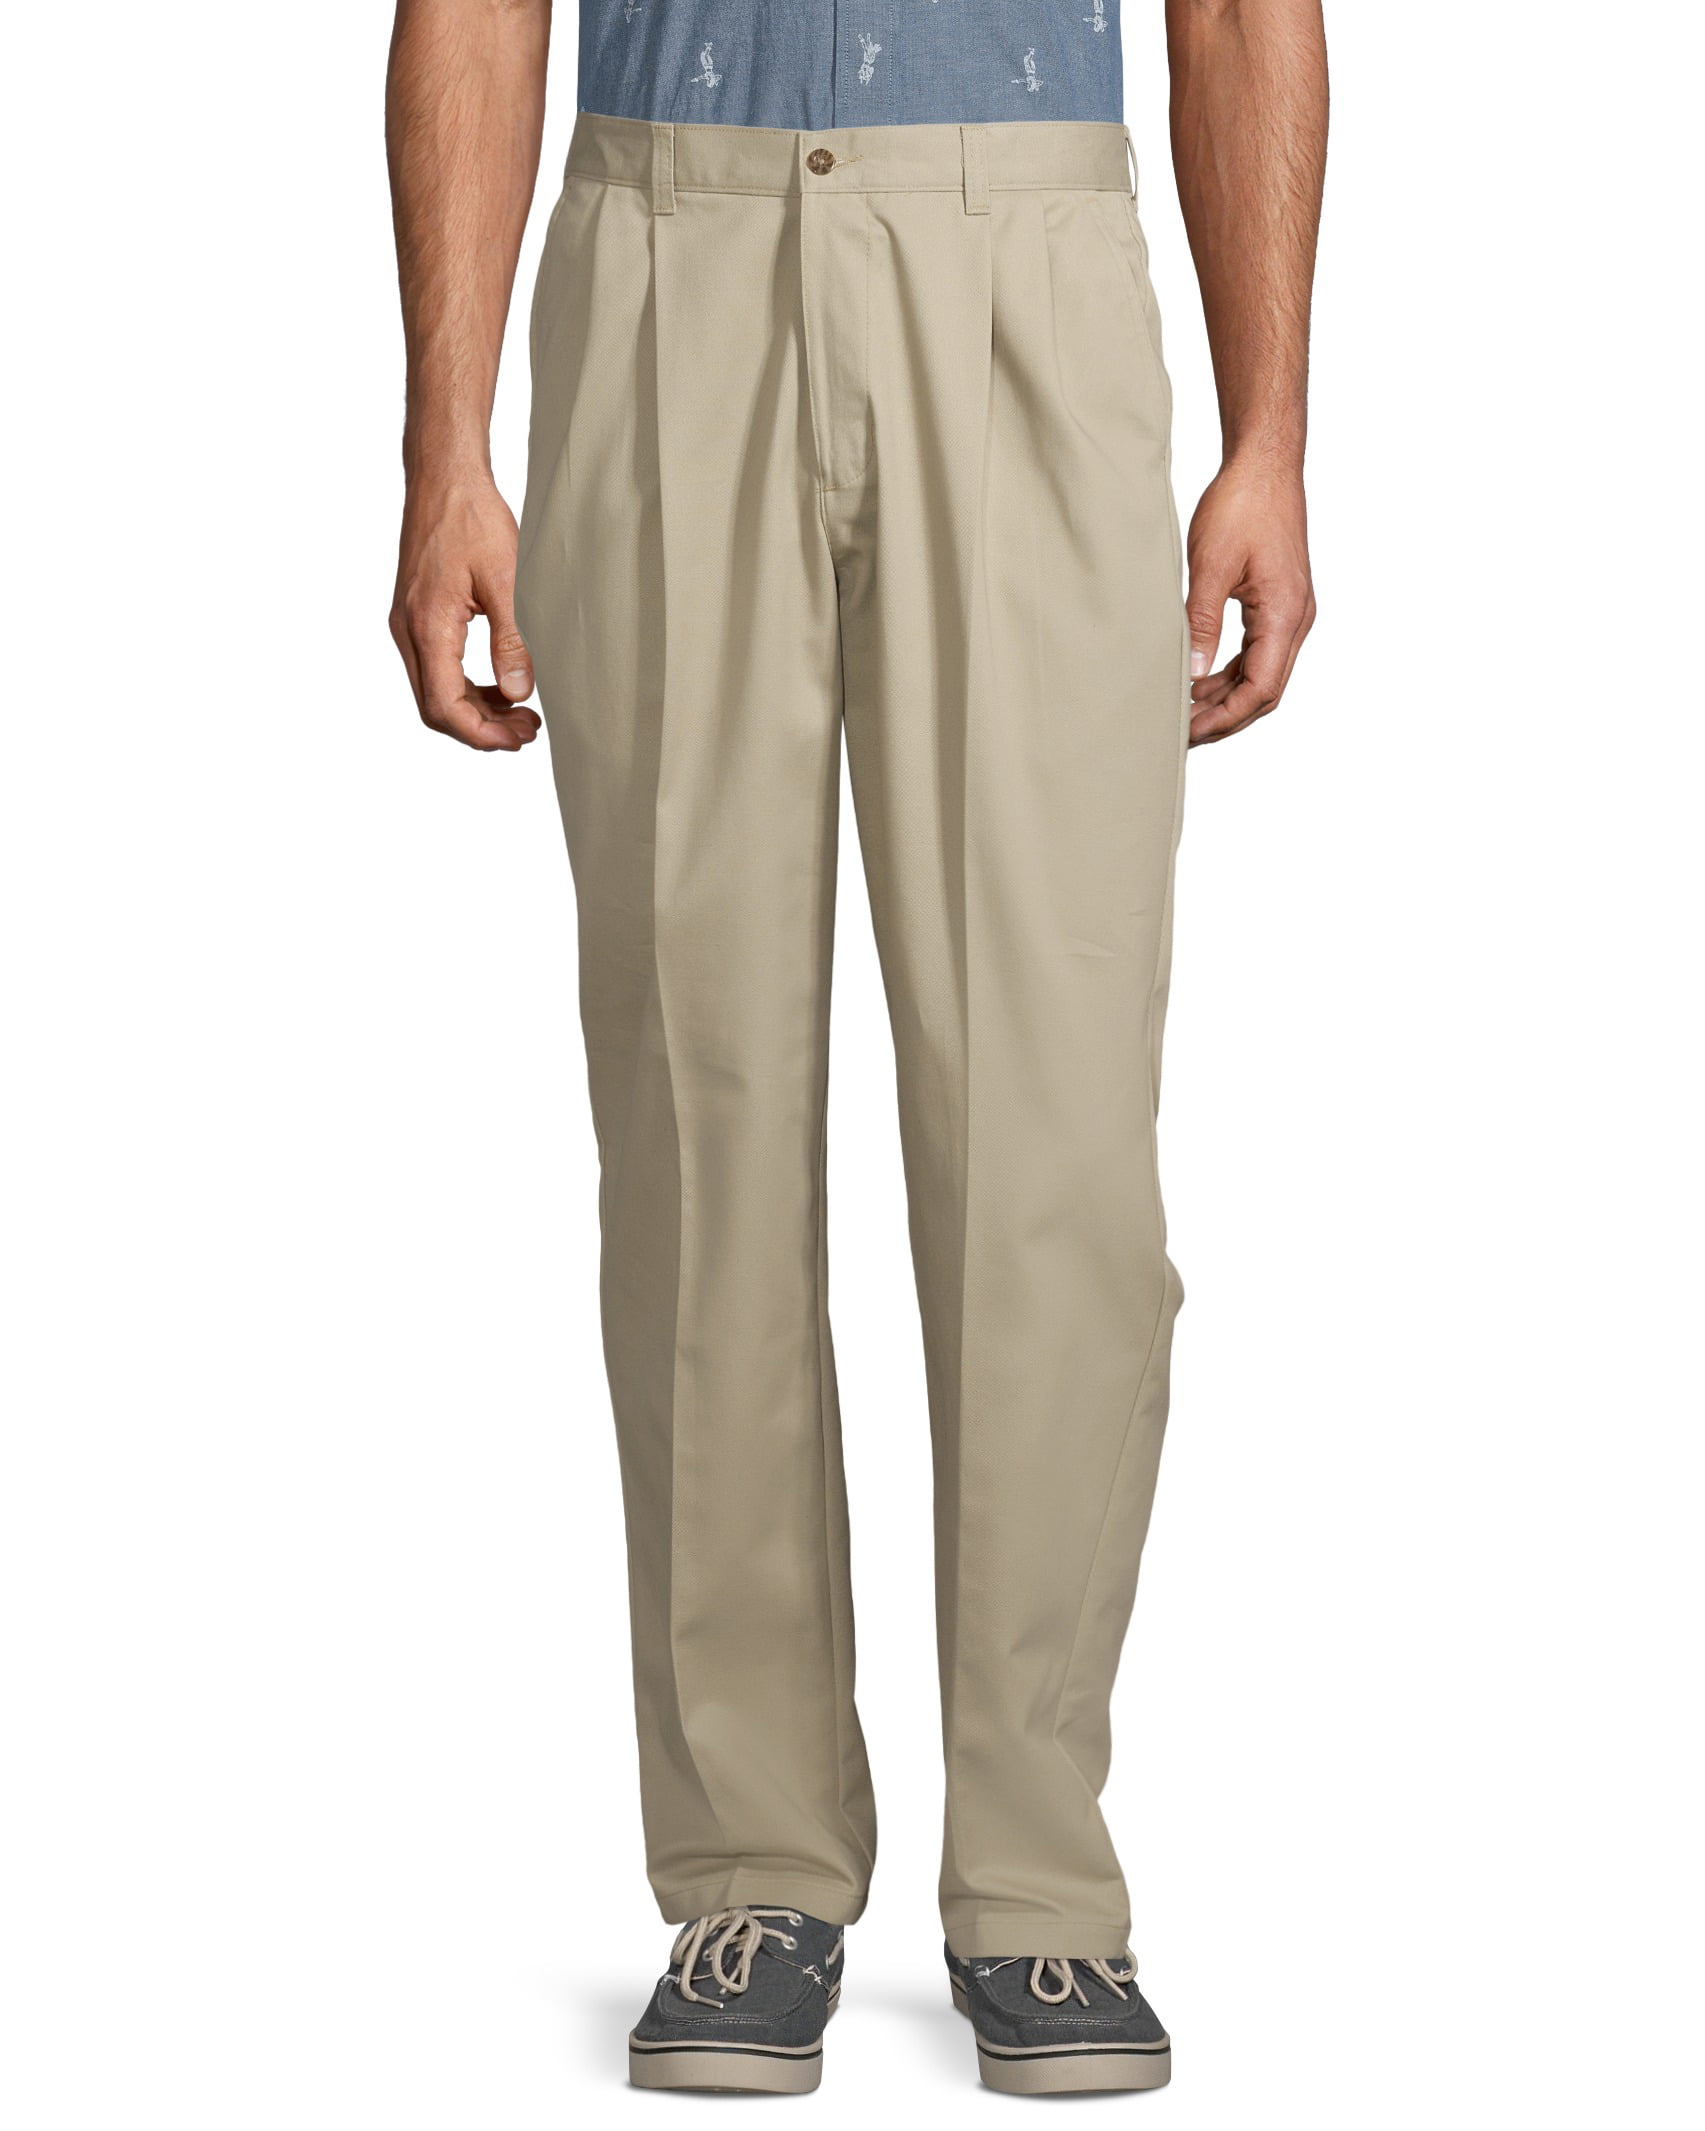 GEORGE - George Big Men's Pleated 100% Cotton Twill Pant with ...